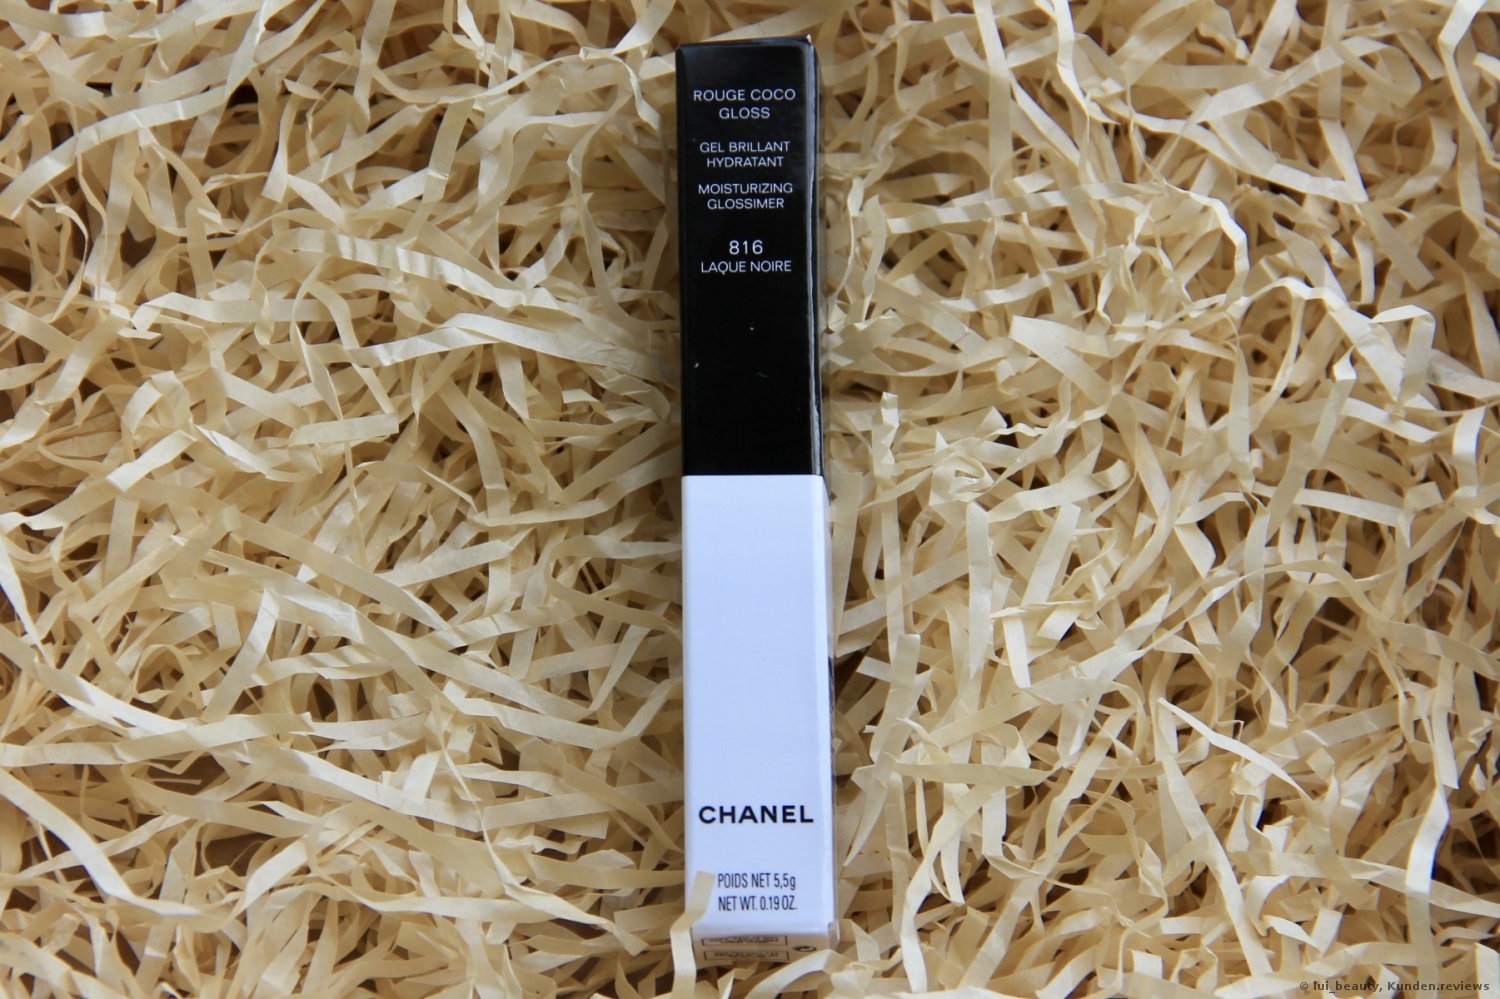 Lipgloss Chanel Rouge Coco 816 laque noire